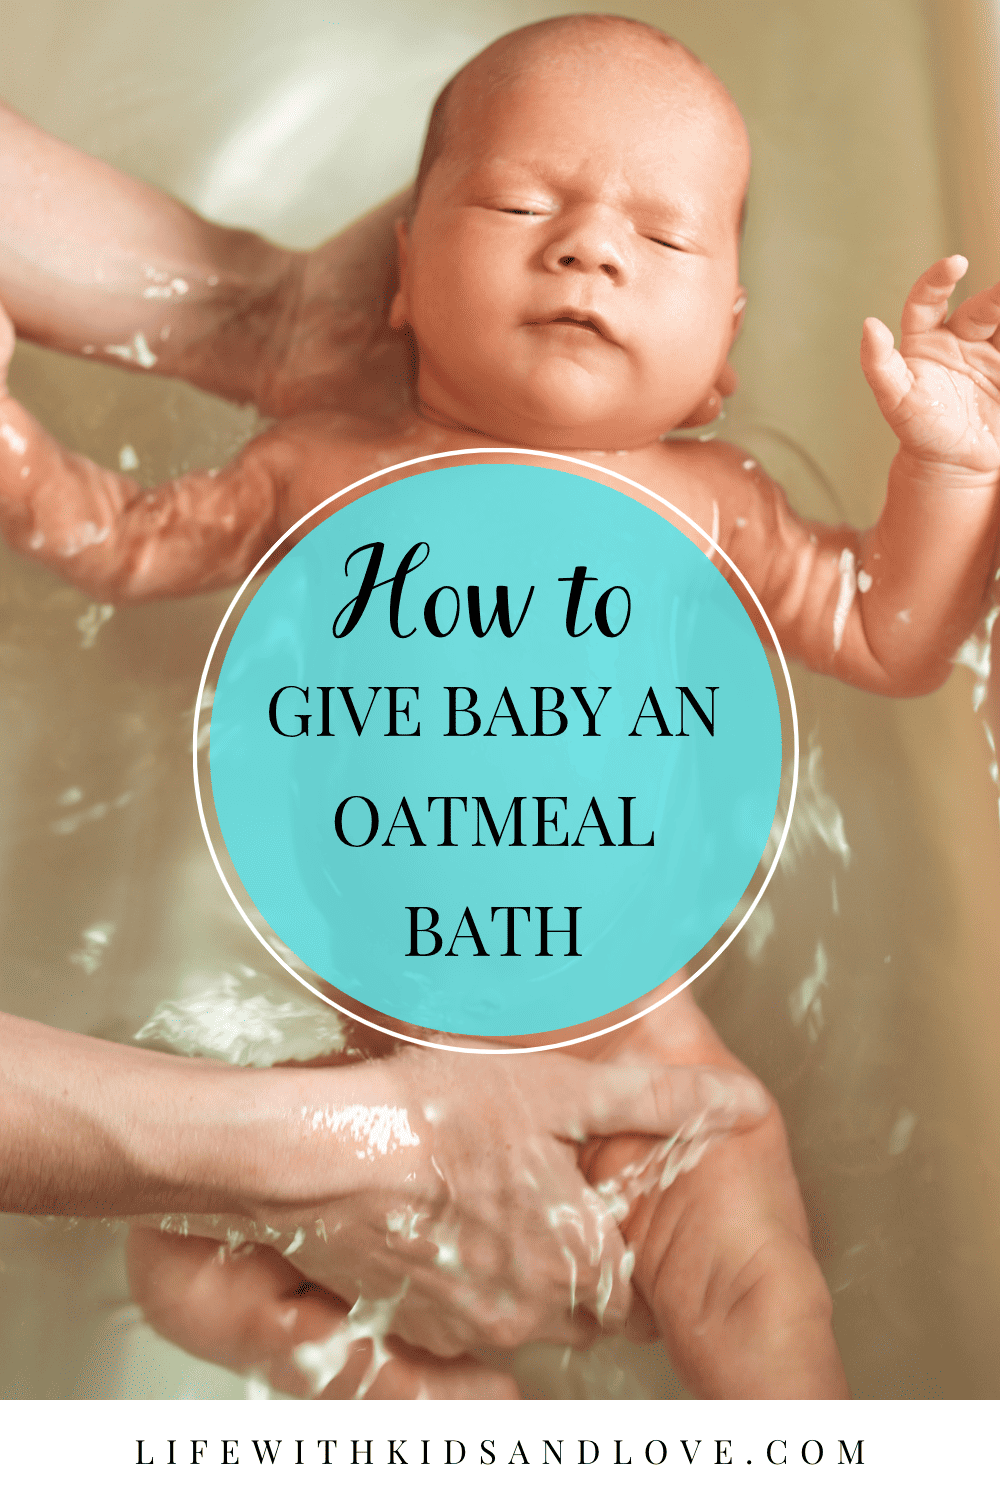 How to Give Baby an Oatmeal Bath